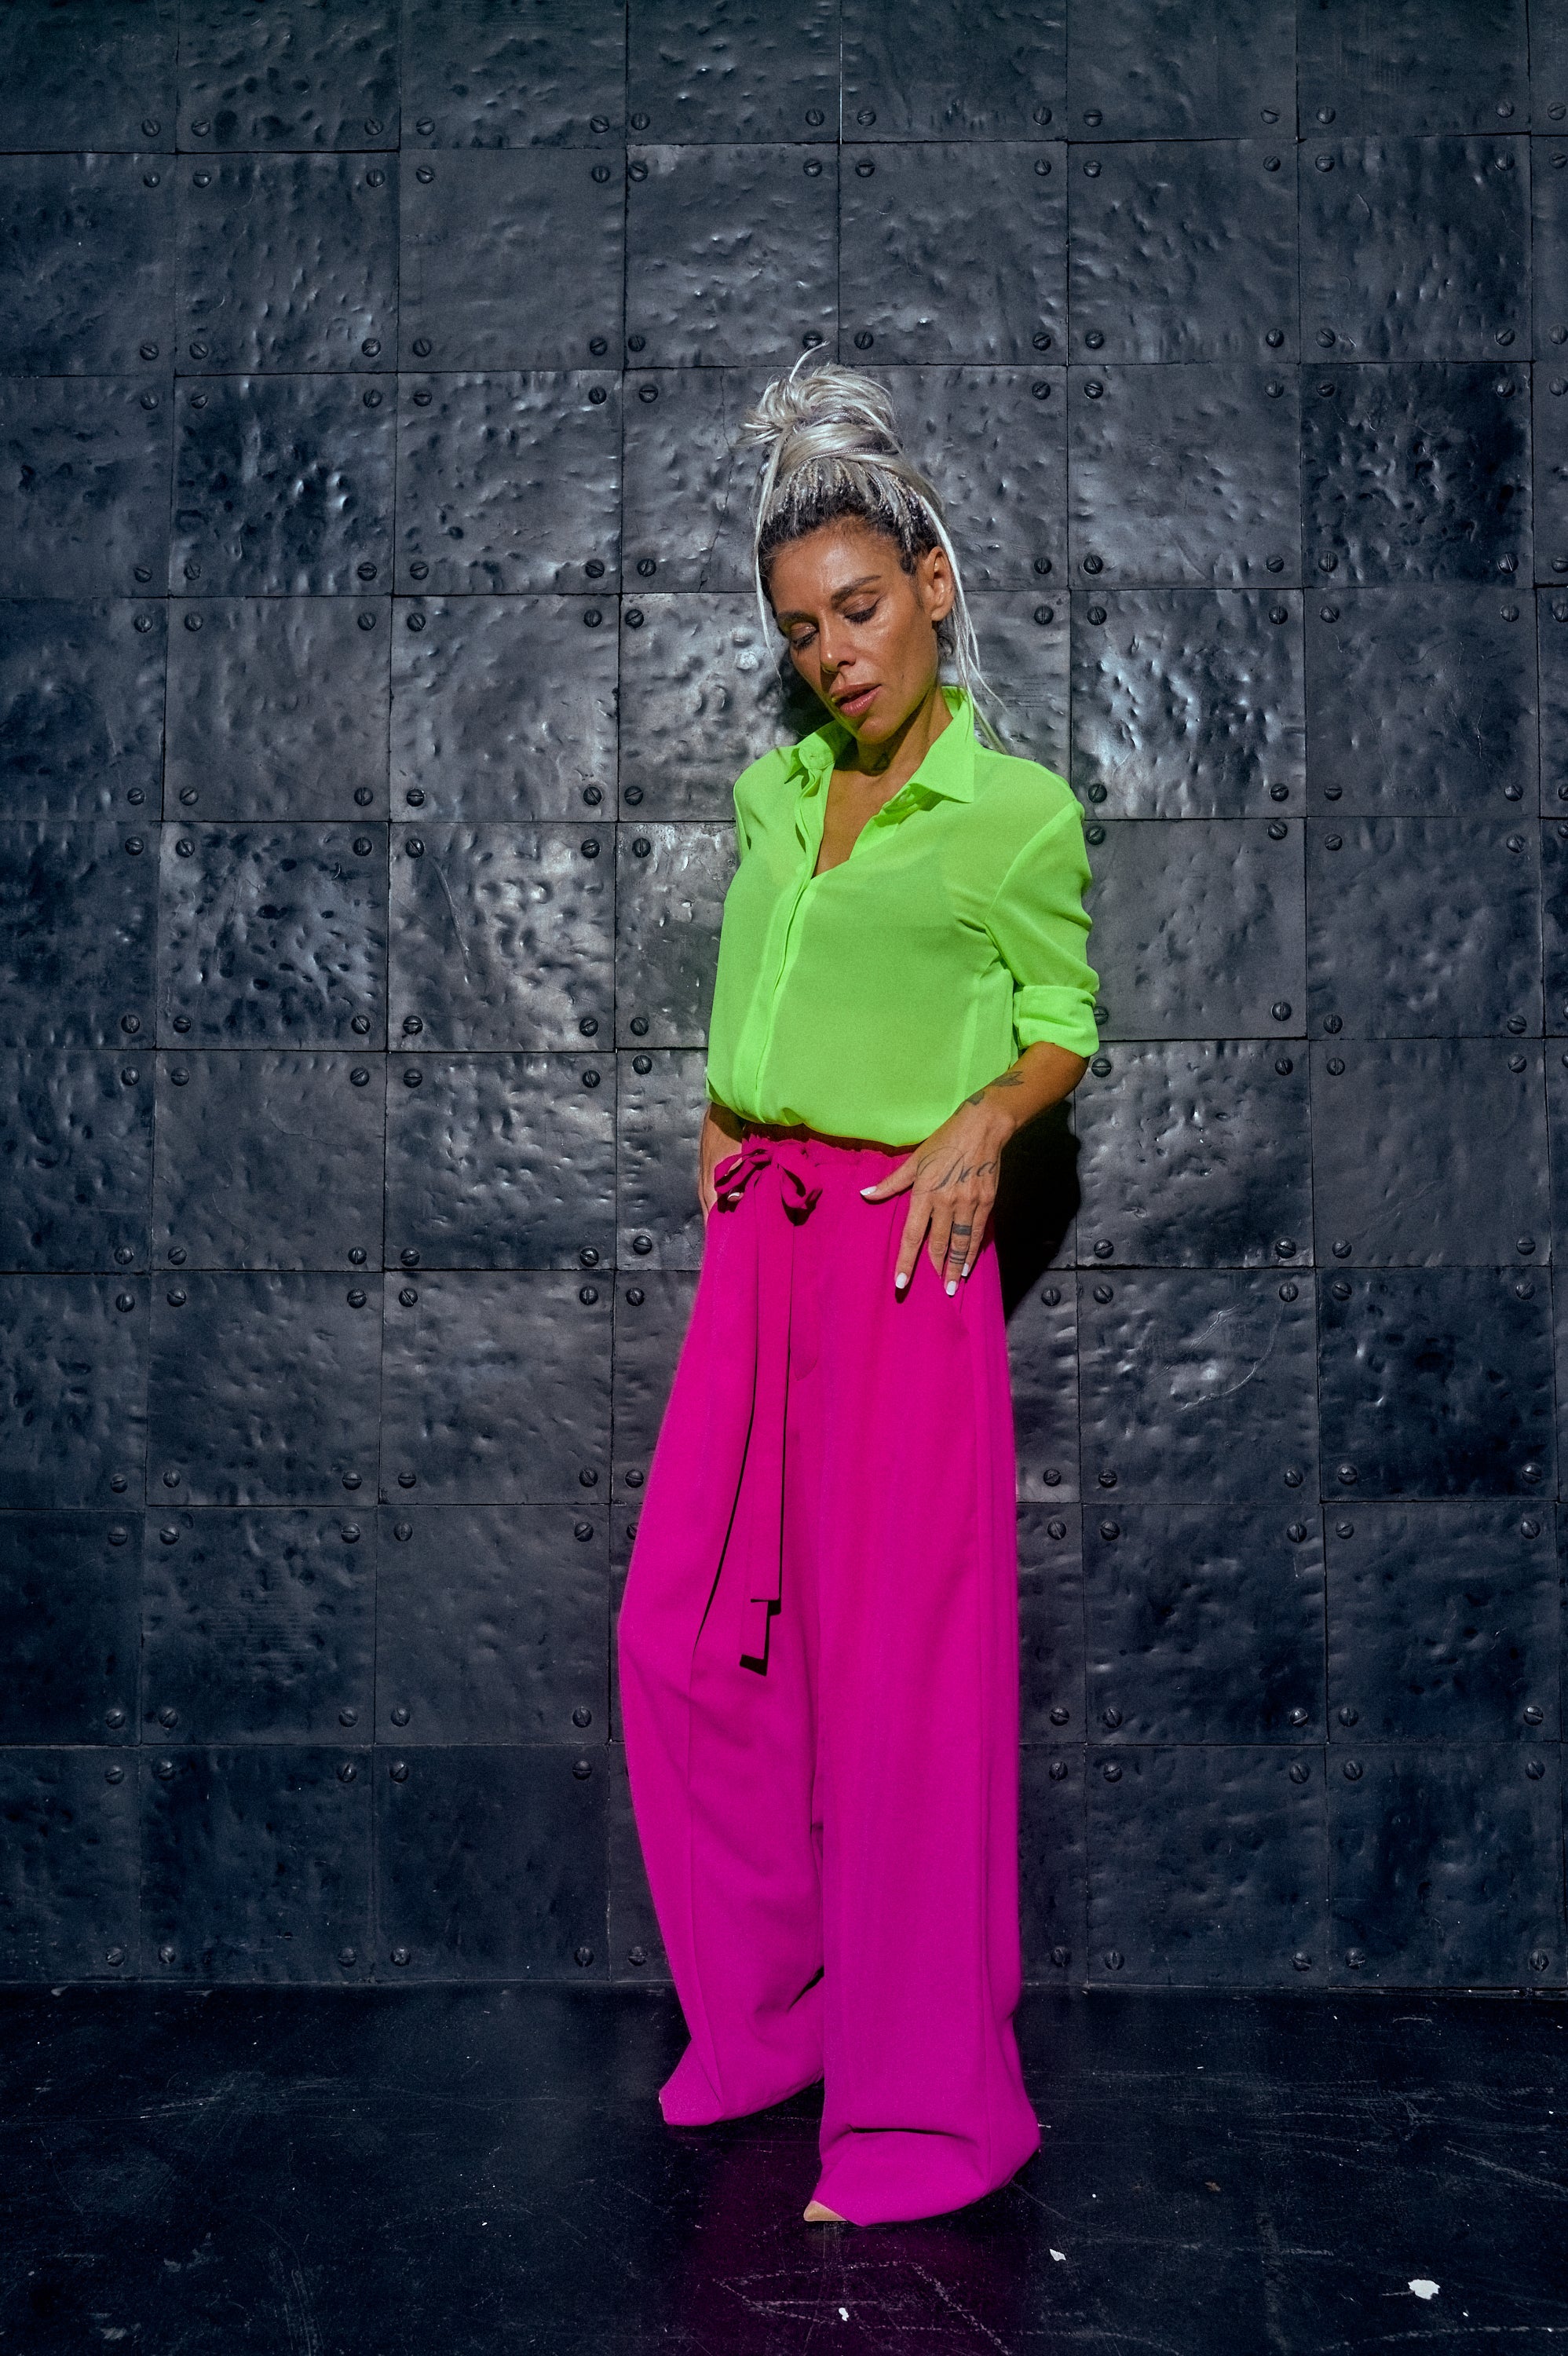 Neon Green Top + Magenta Pants Outfit Set – Clothes By Locker Room